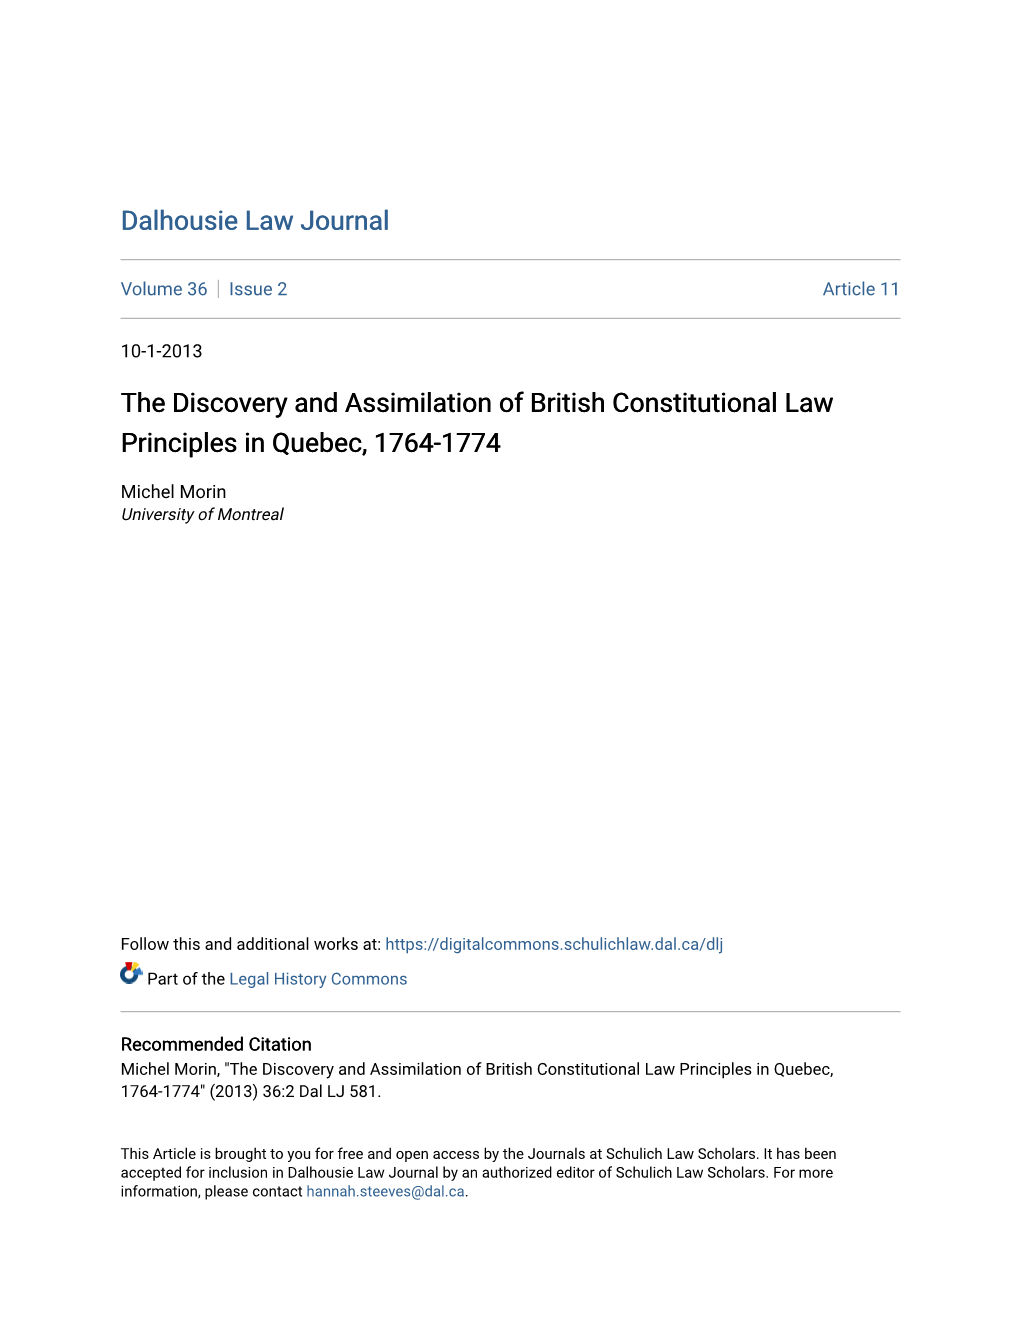 The Discovery and Assimilation of British Constitutional Law Principles in Quebec, 1764-1774